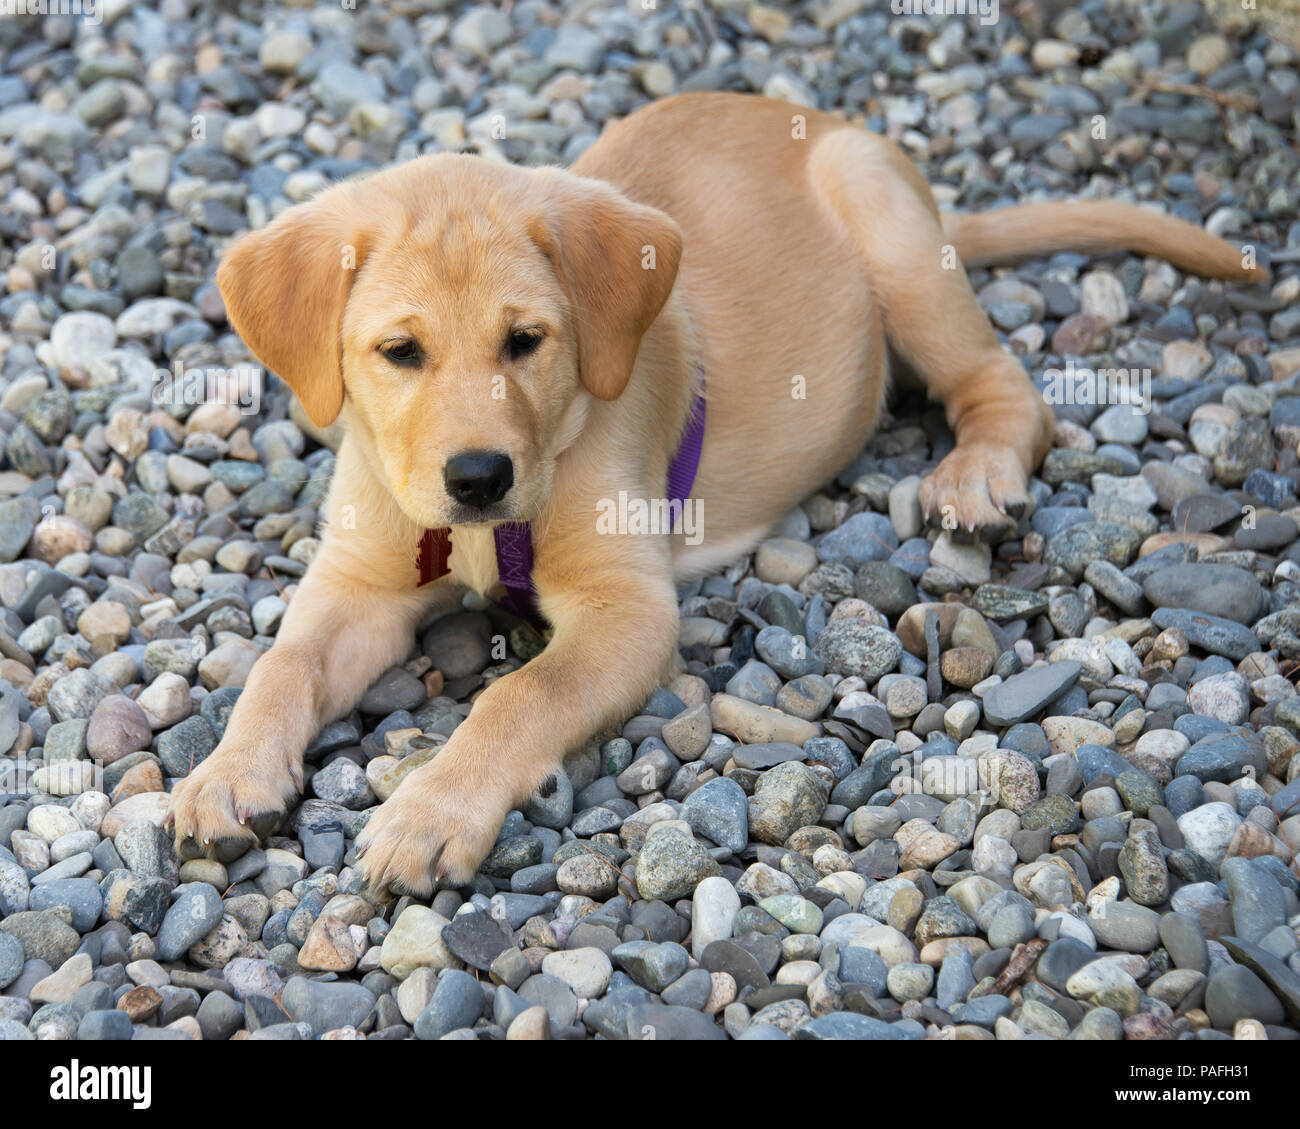 Labrador Mix High Resolution Stock Photography and Images - Alamy